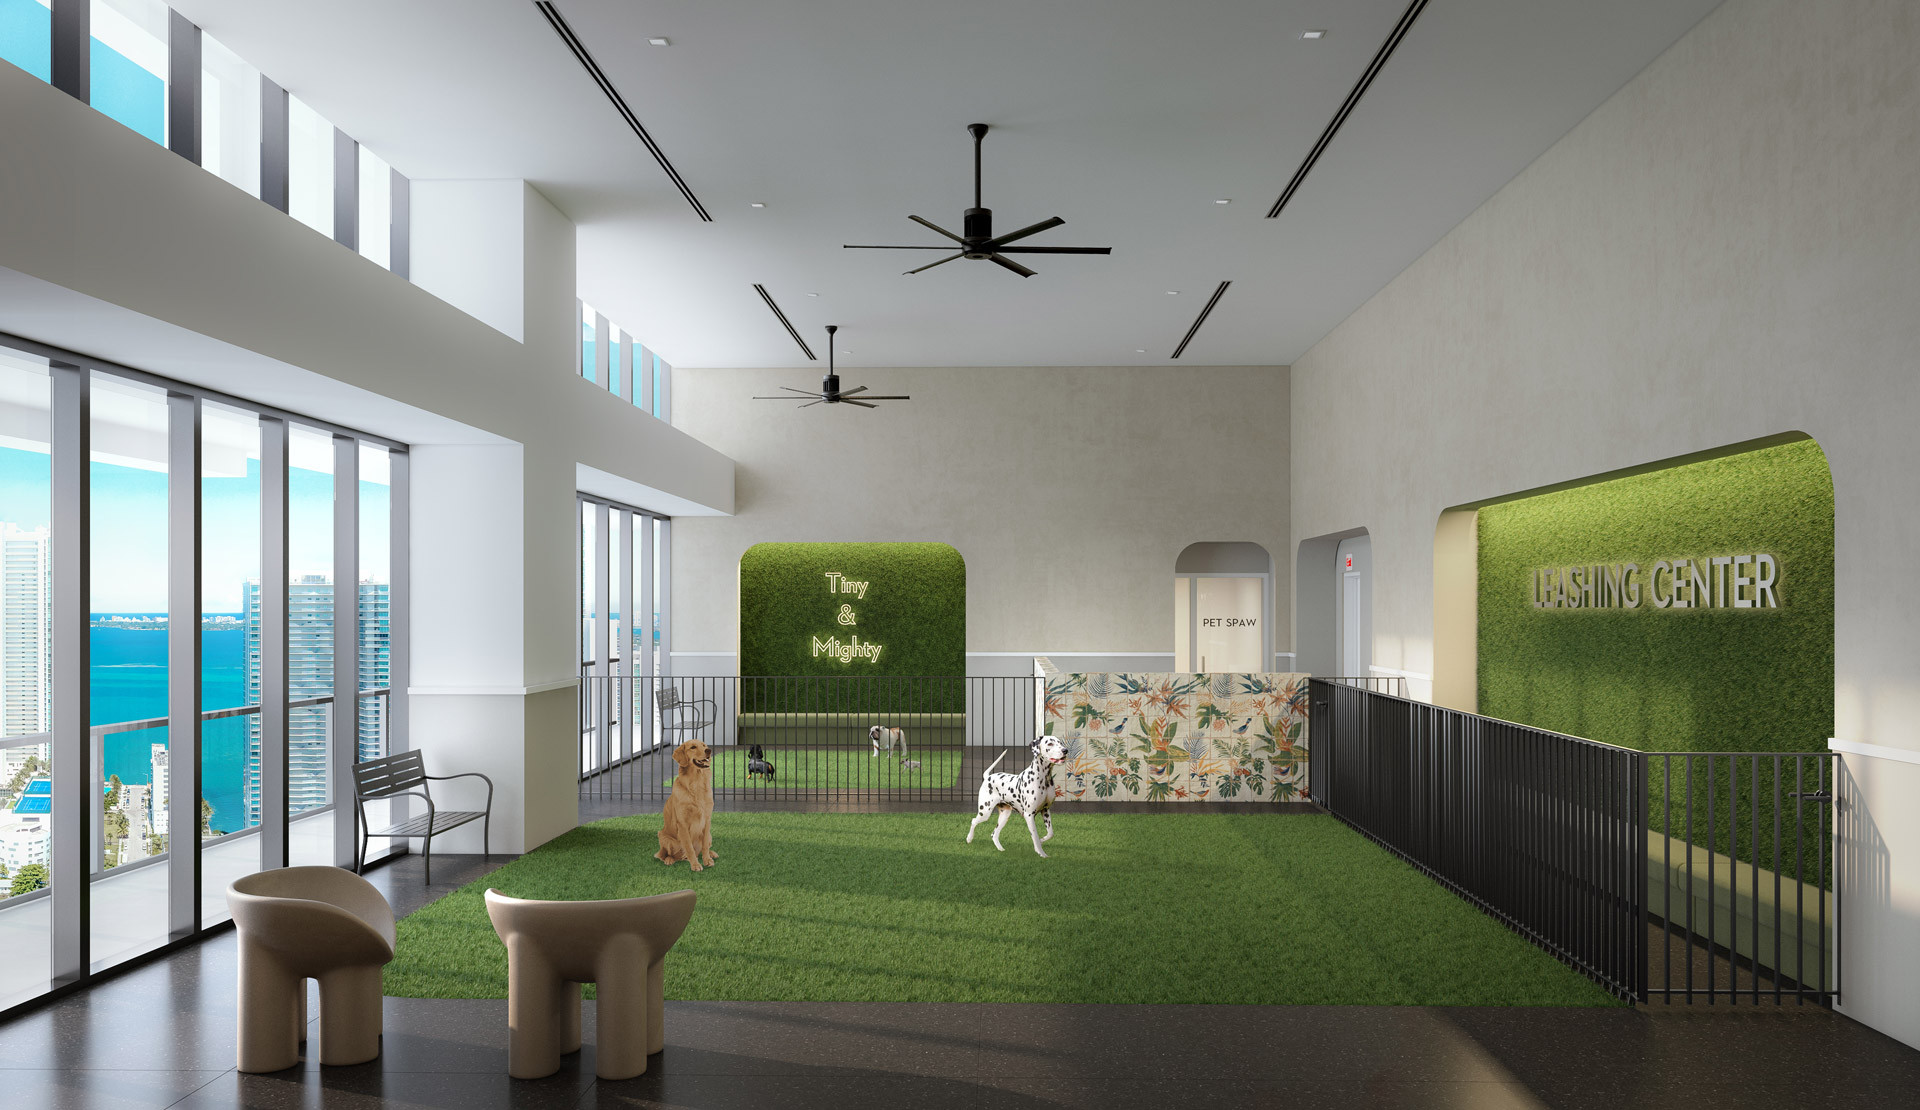 Forma Miami features a dog lounge for residents, offering multiple playground areas and a pet spaw for washing and grooming.